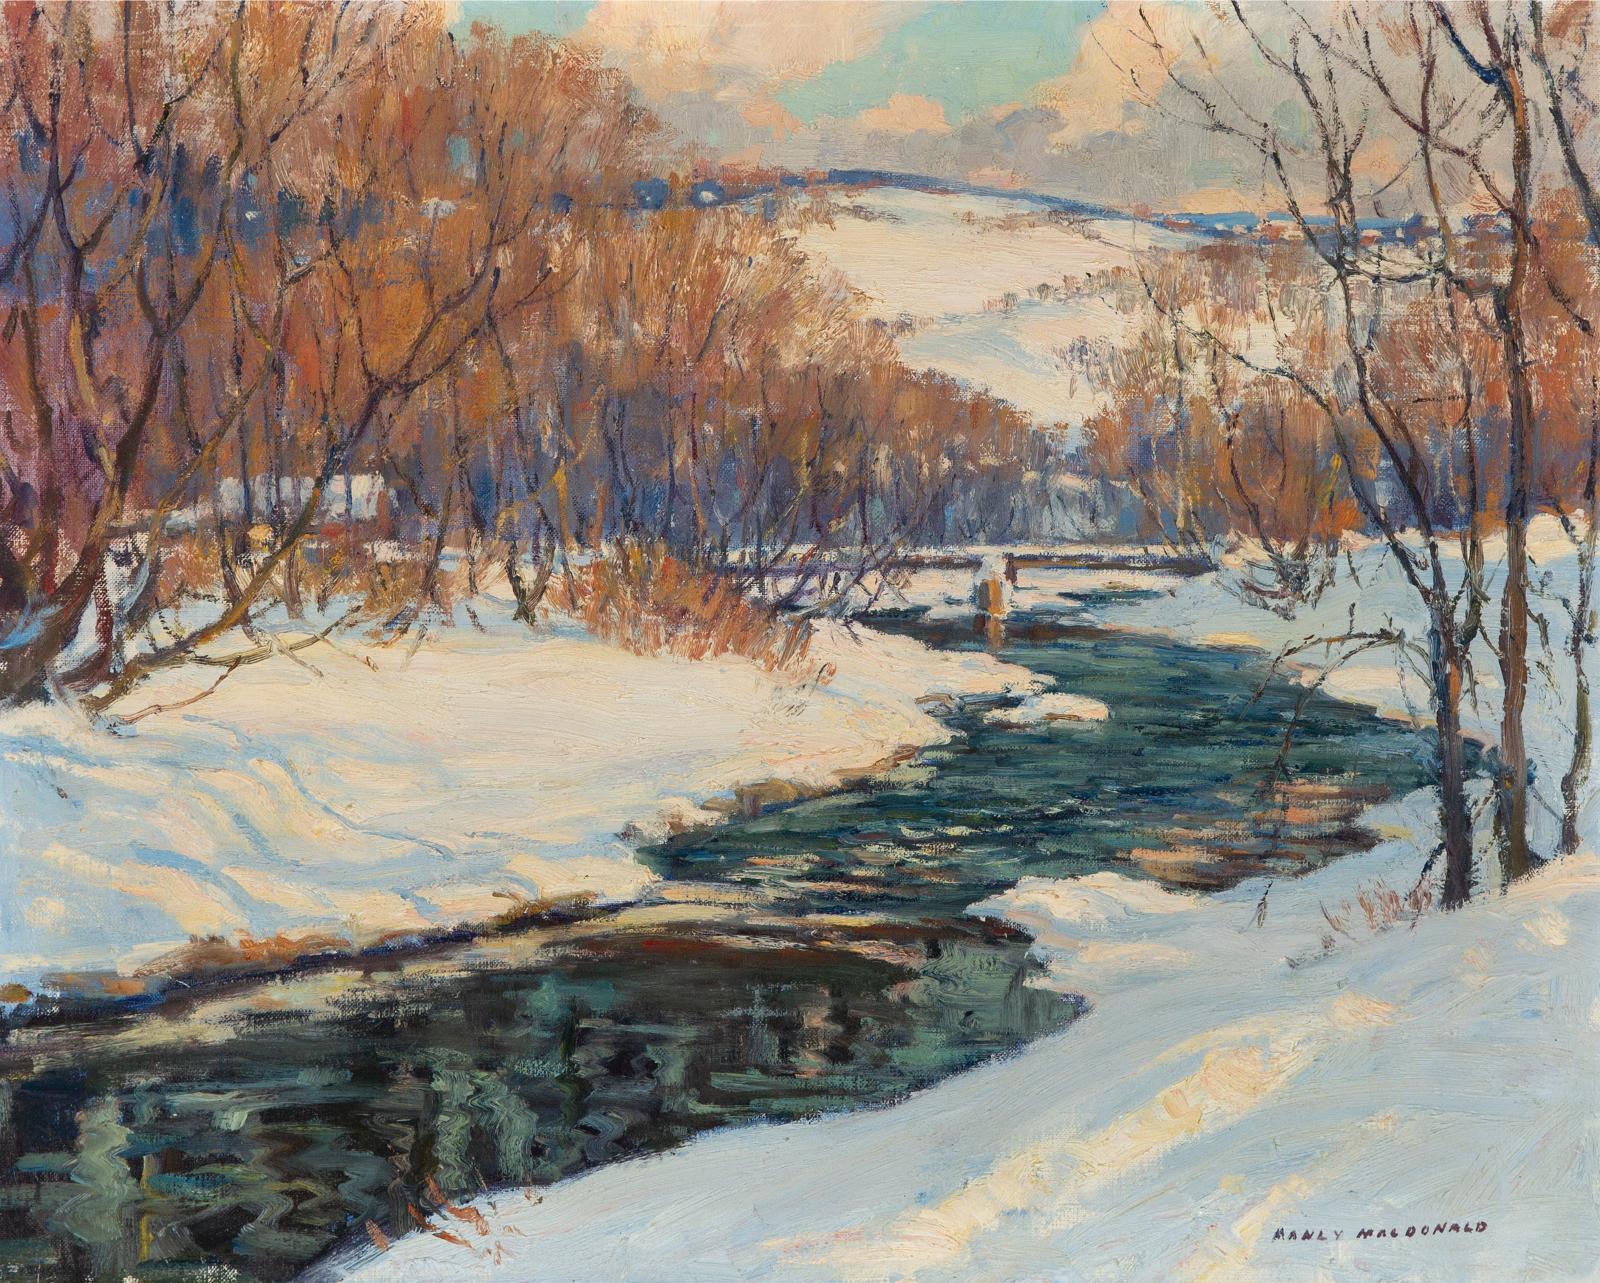 Manly Edward MacDonald (1889-1971) - First Snow On The Upper Don